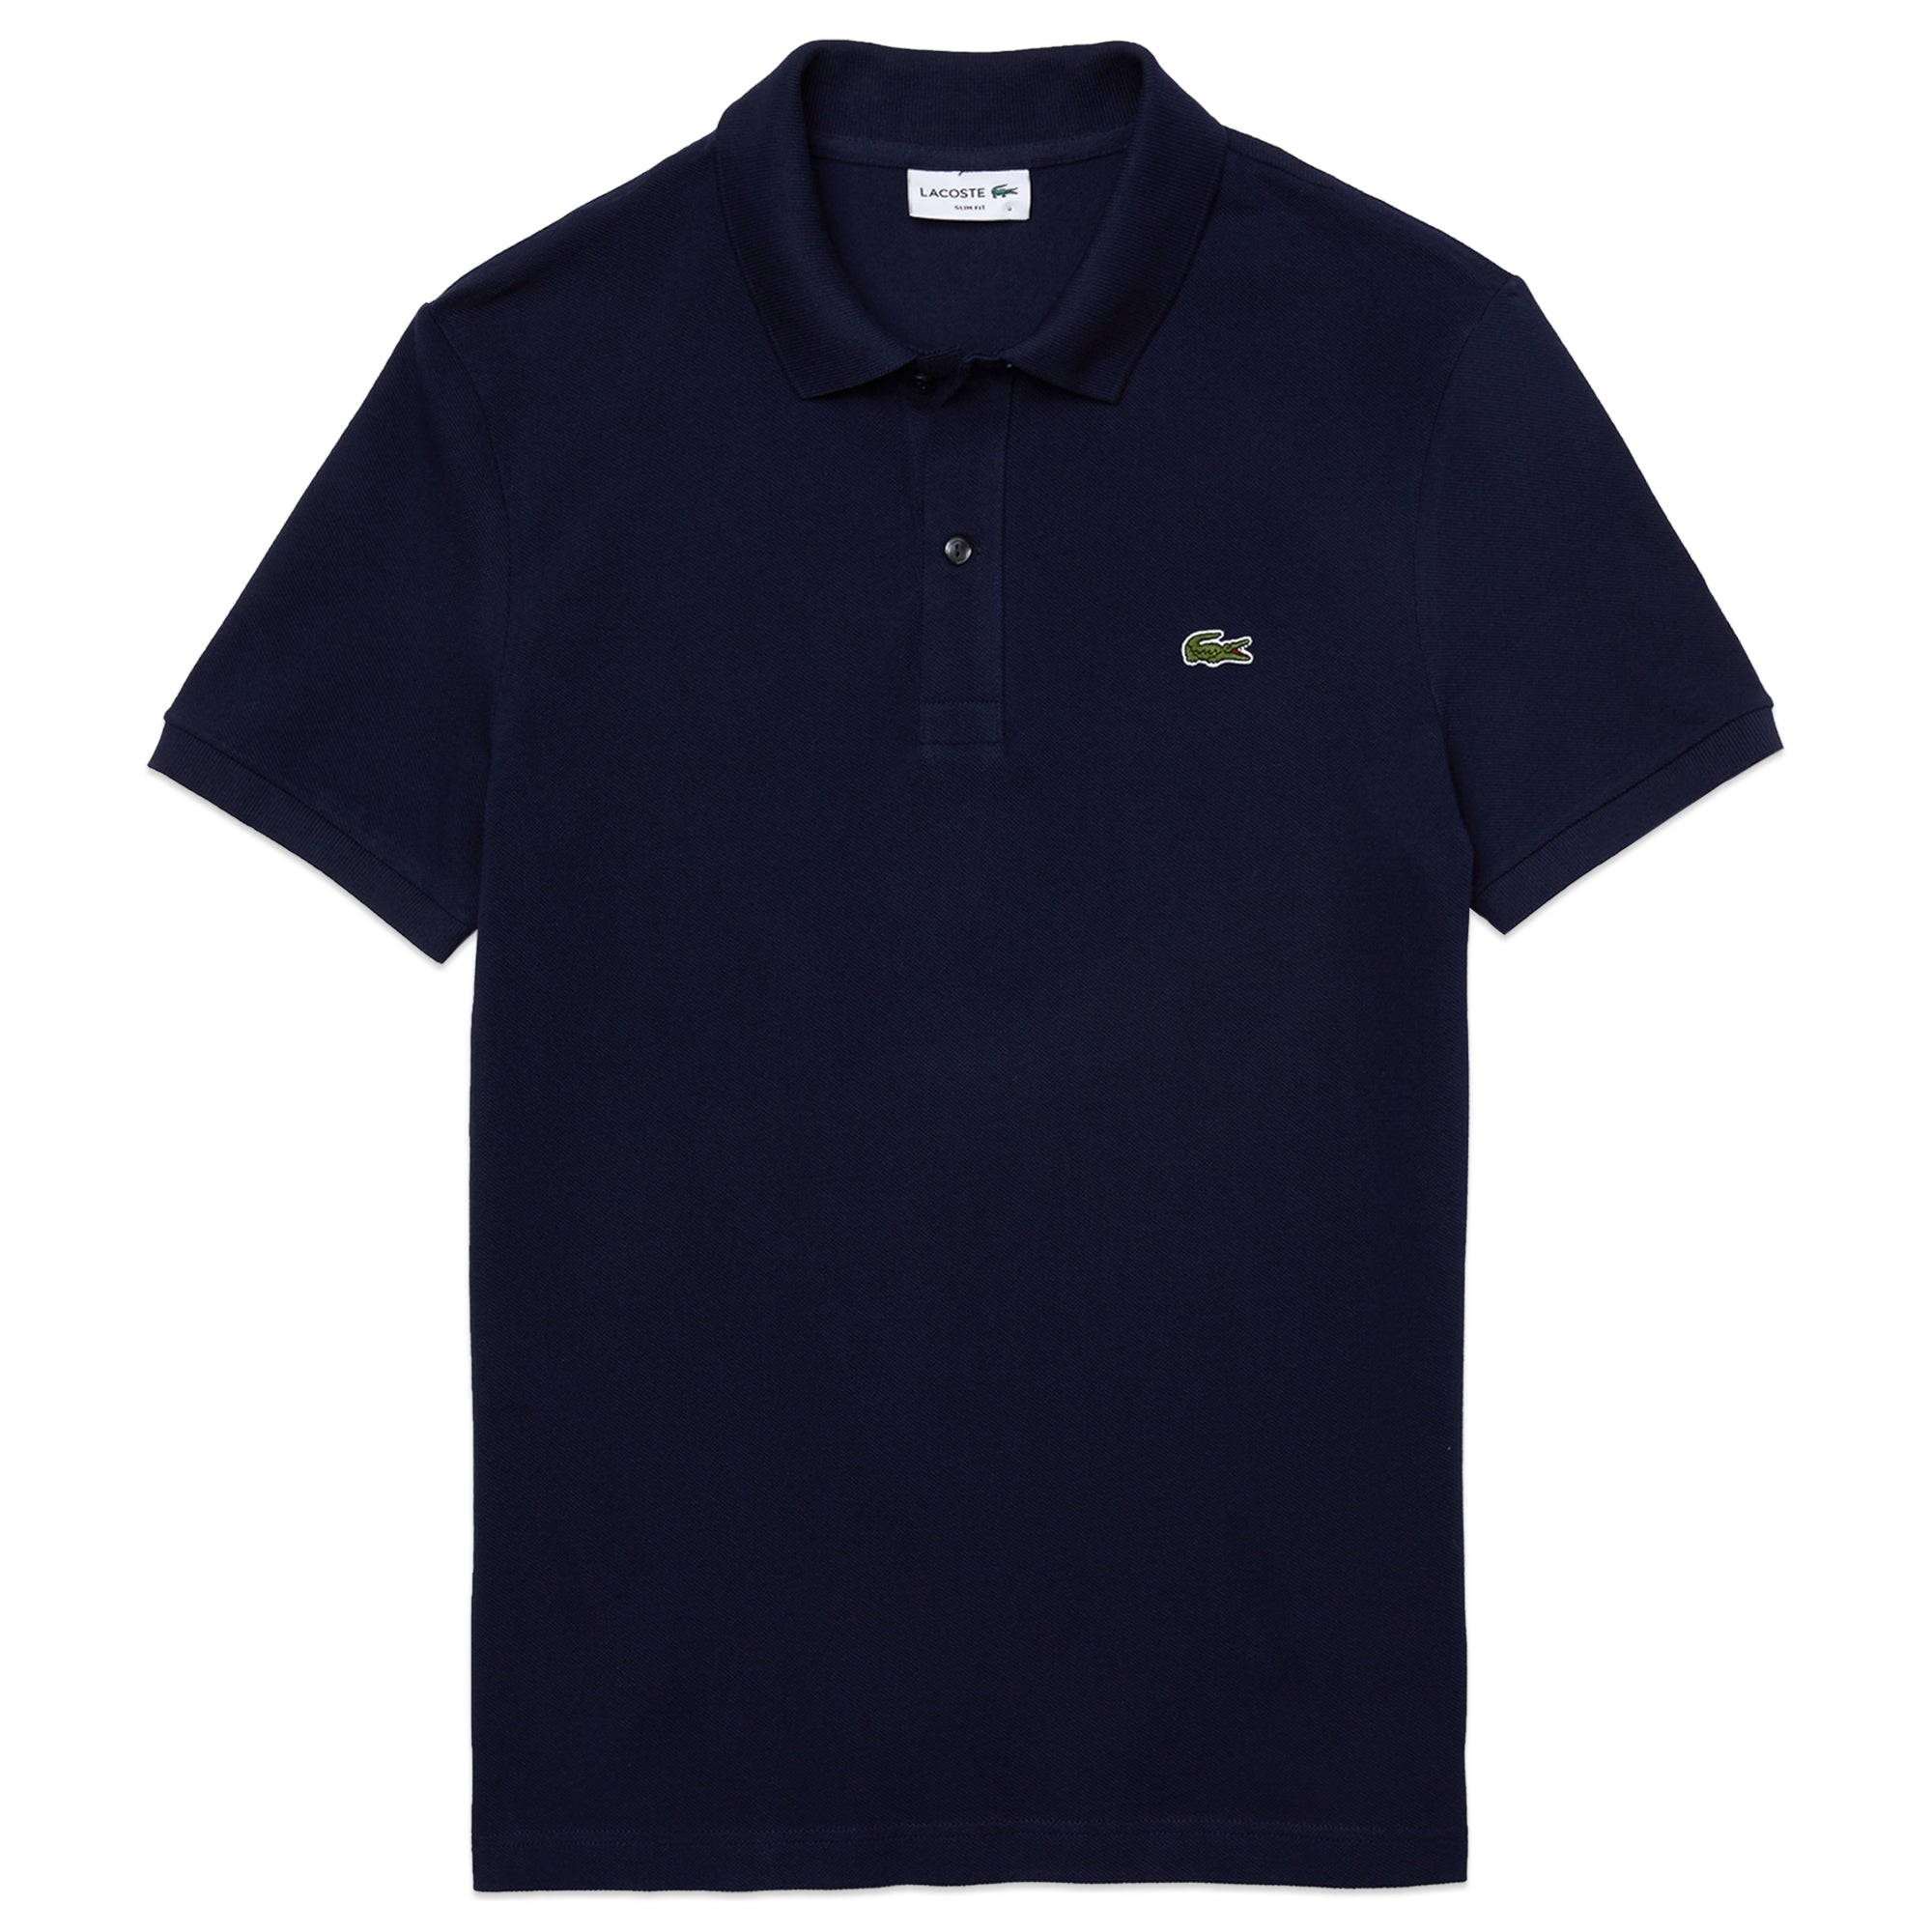 Lacoste Short Sleeved Slim Fit Argentina - PH4012 Blue Polo